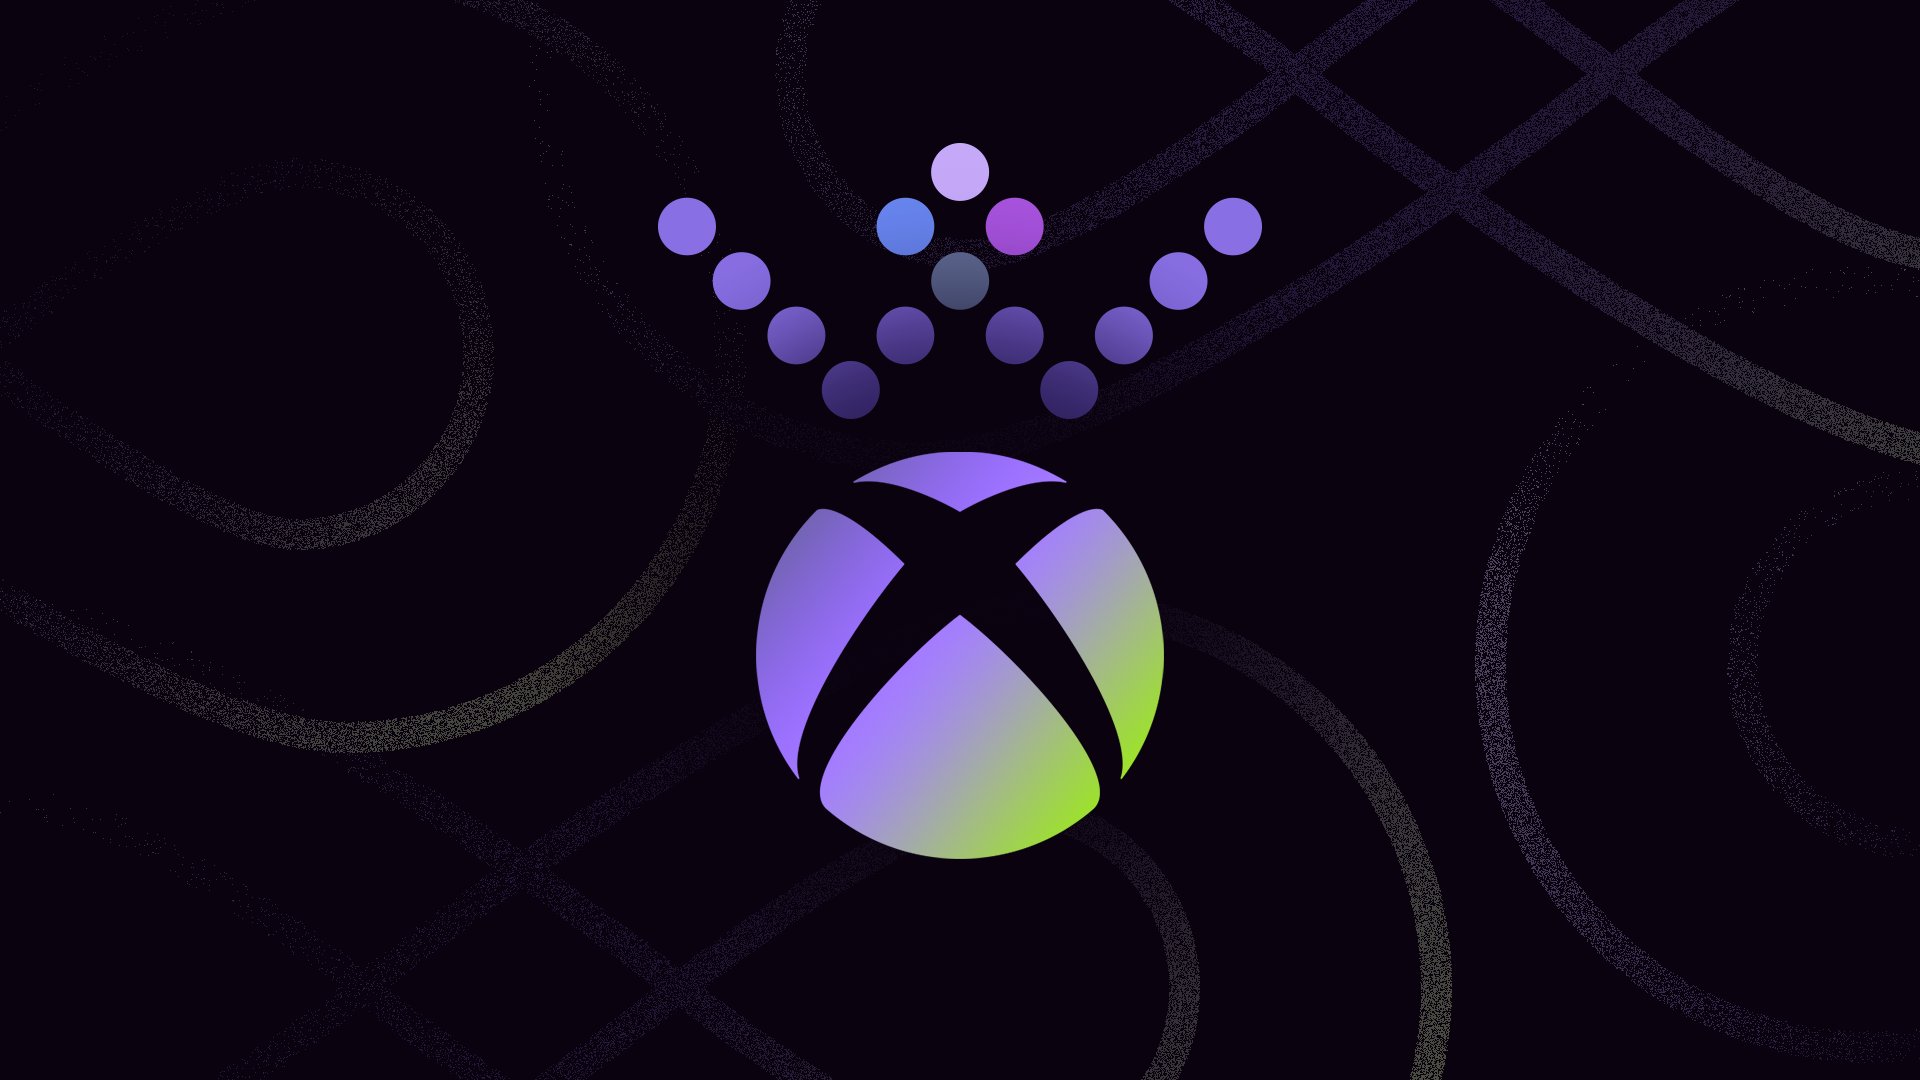 A green and purple Xbox logo and crown on an abstract purple background.